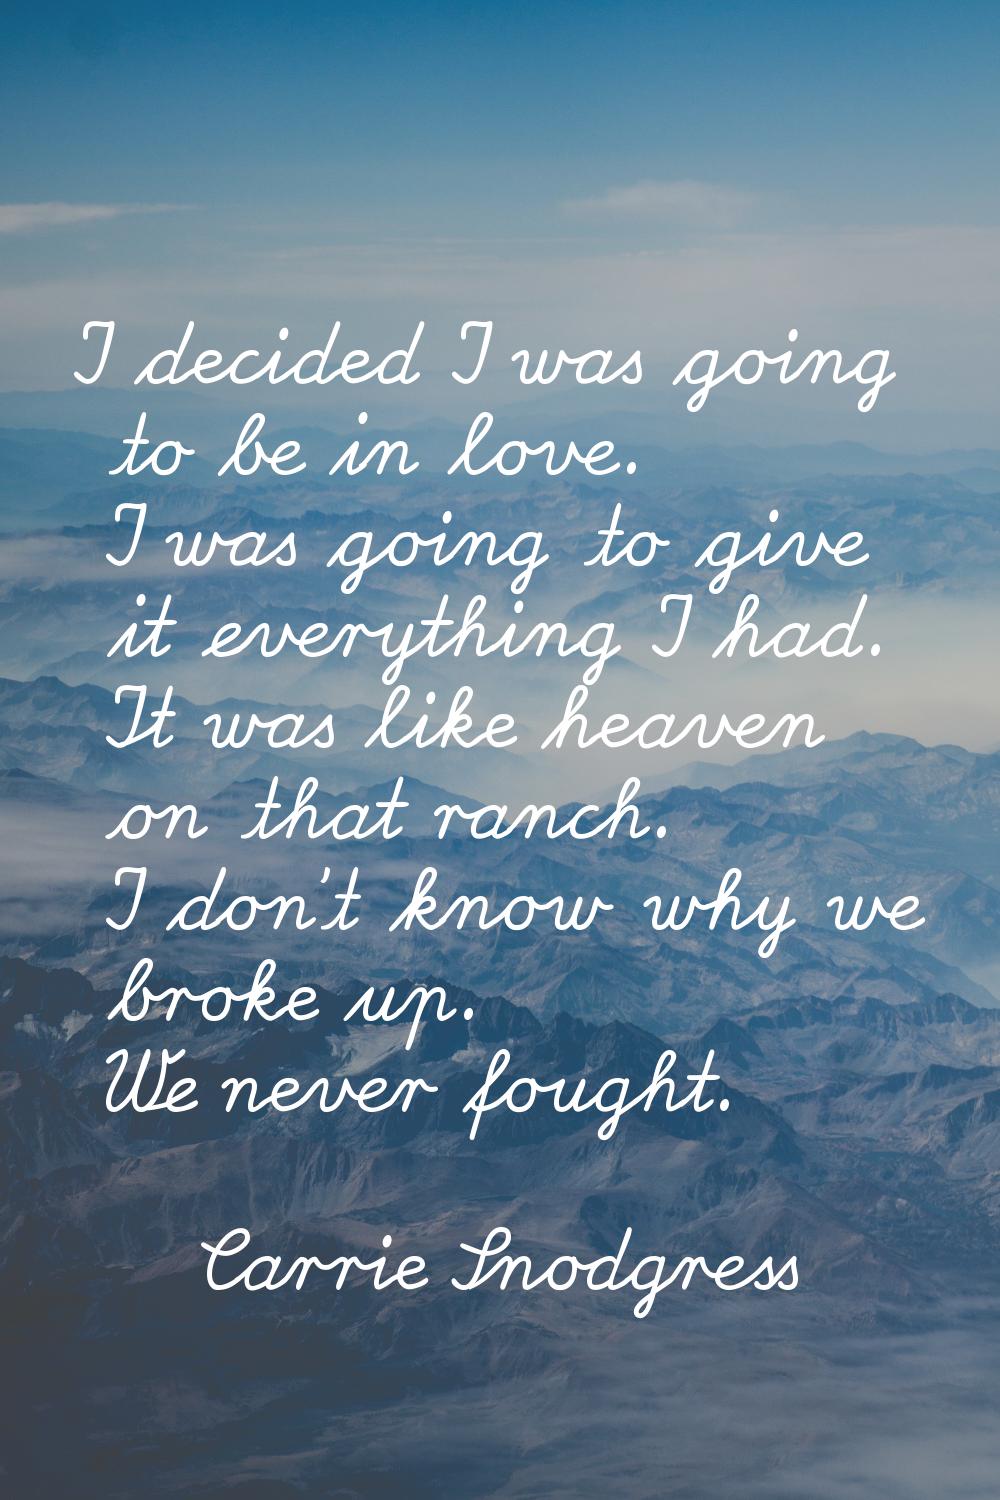 I decided I was going to be in love. I was going to give it everything I had. It was like heaven on